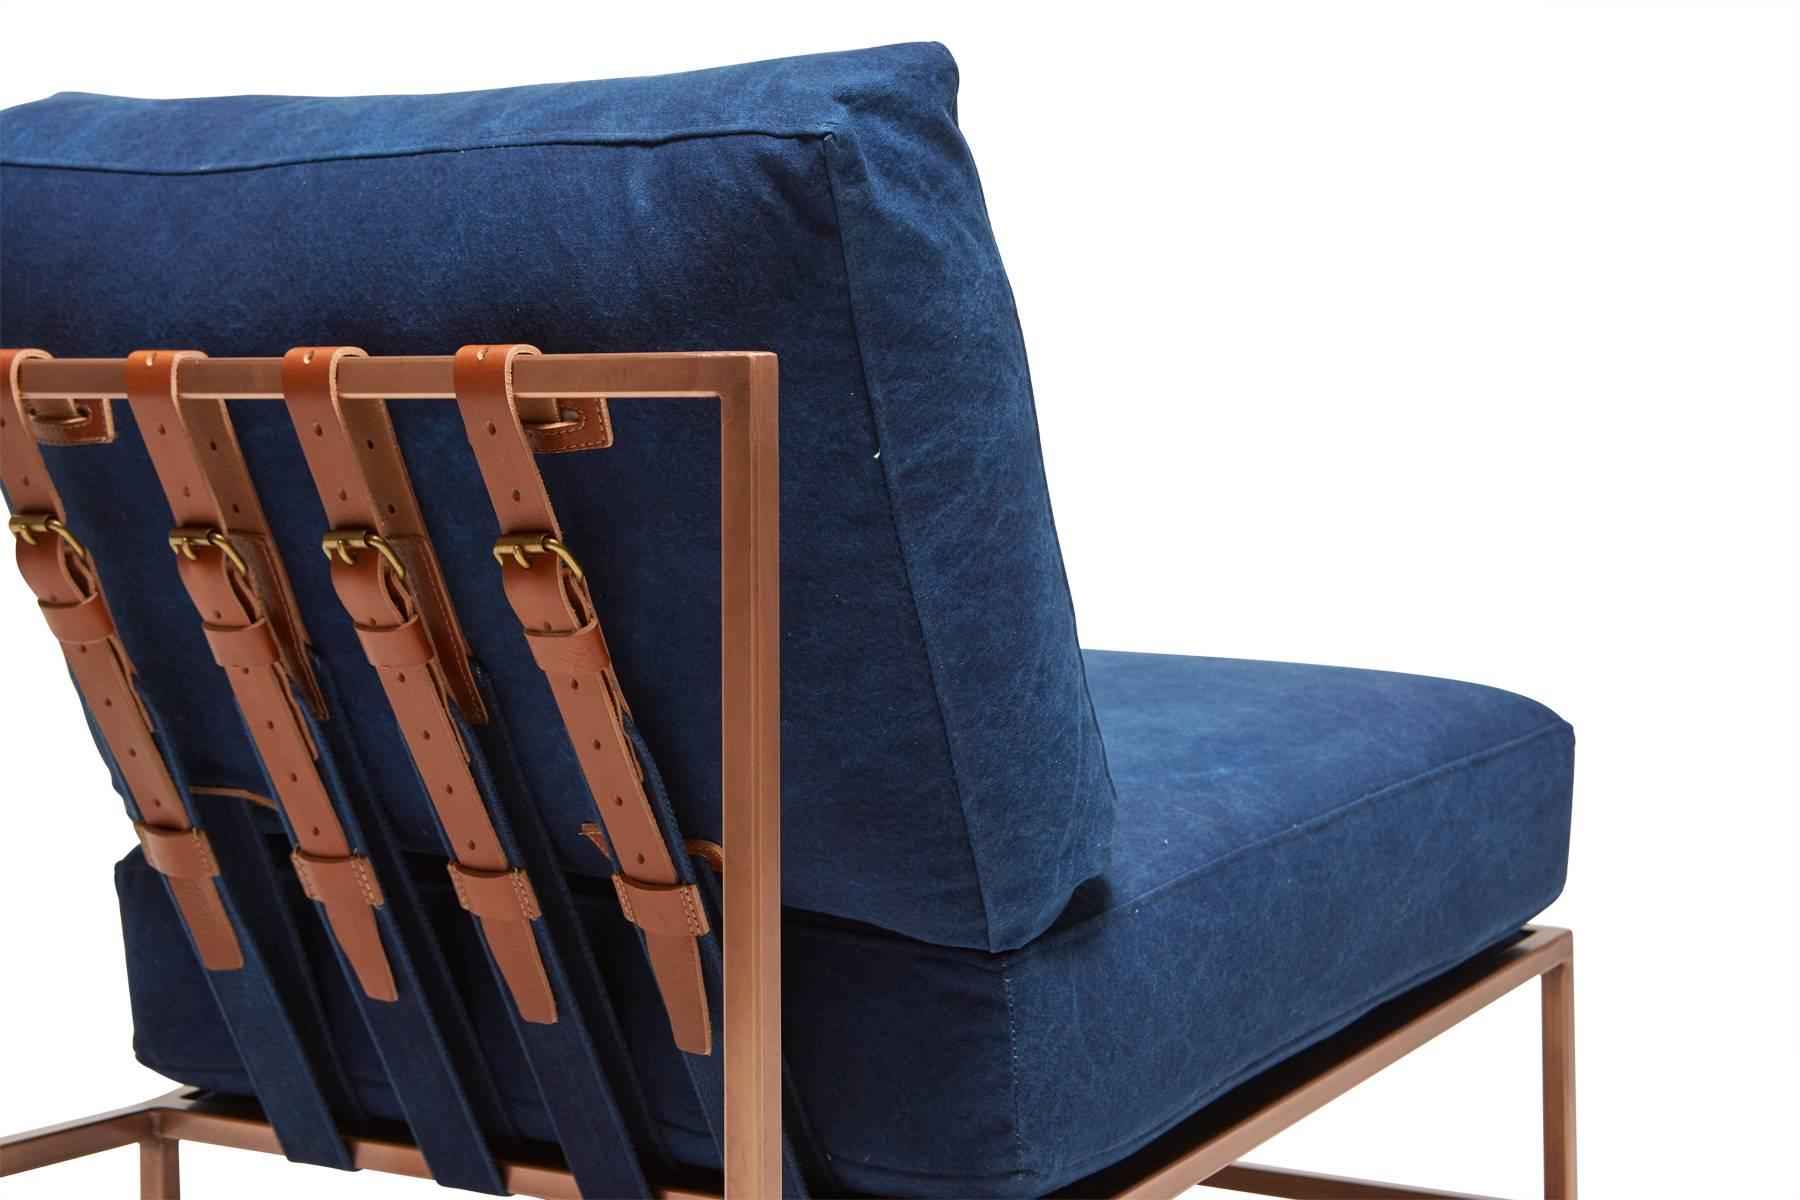 IHand-Dyed Indigo Canvas and Antique Copper Chair In New Condition For Sale In Los Angeles, CA